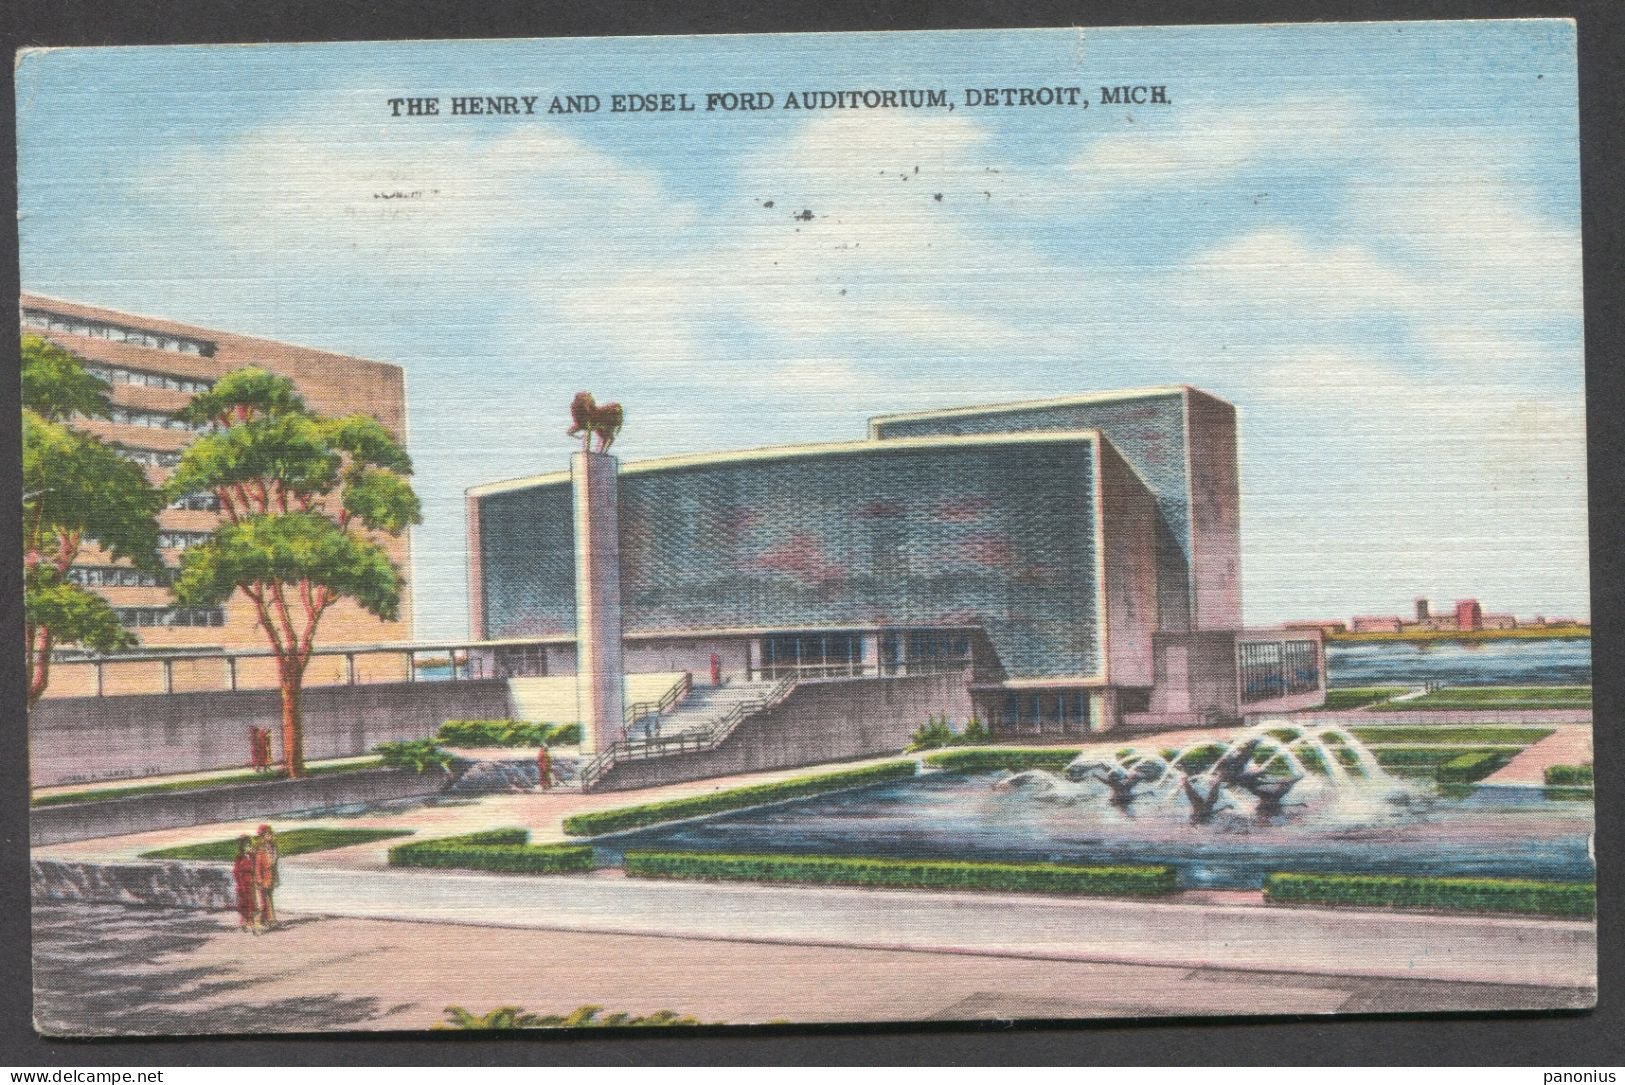 DETROIT MICHIGAN, THE HENRY AND EDSEL FORD AUDITORIUM - Detroit